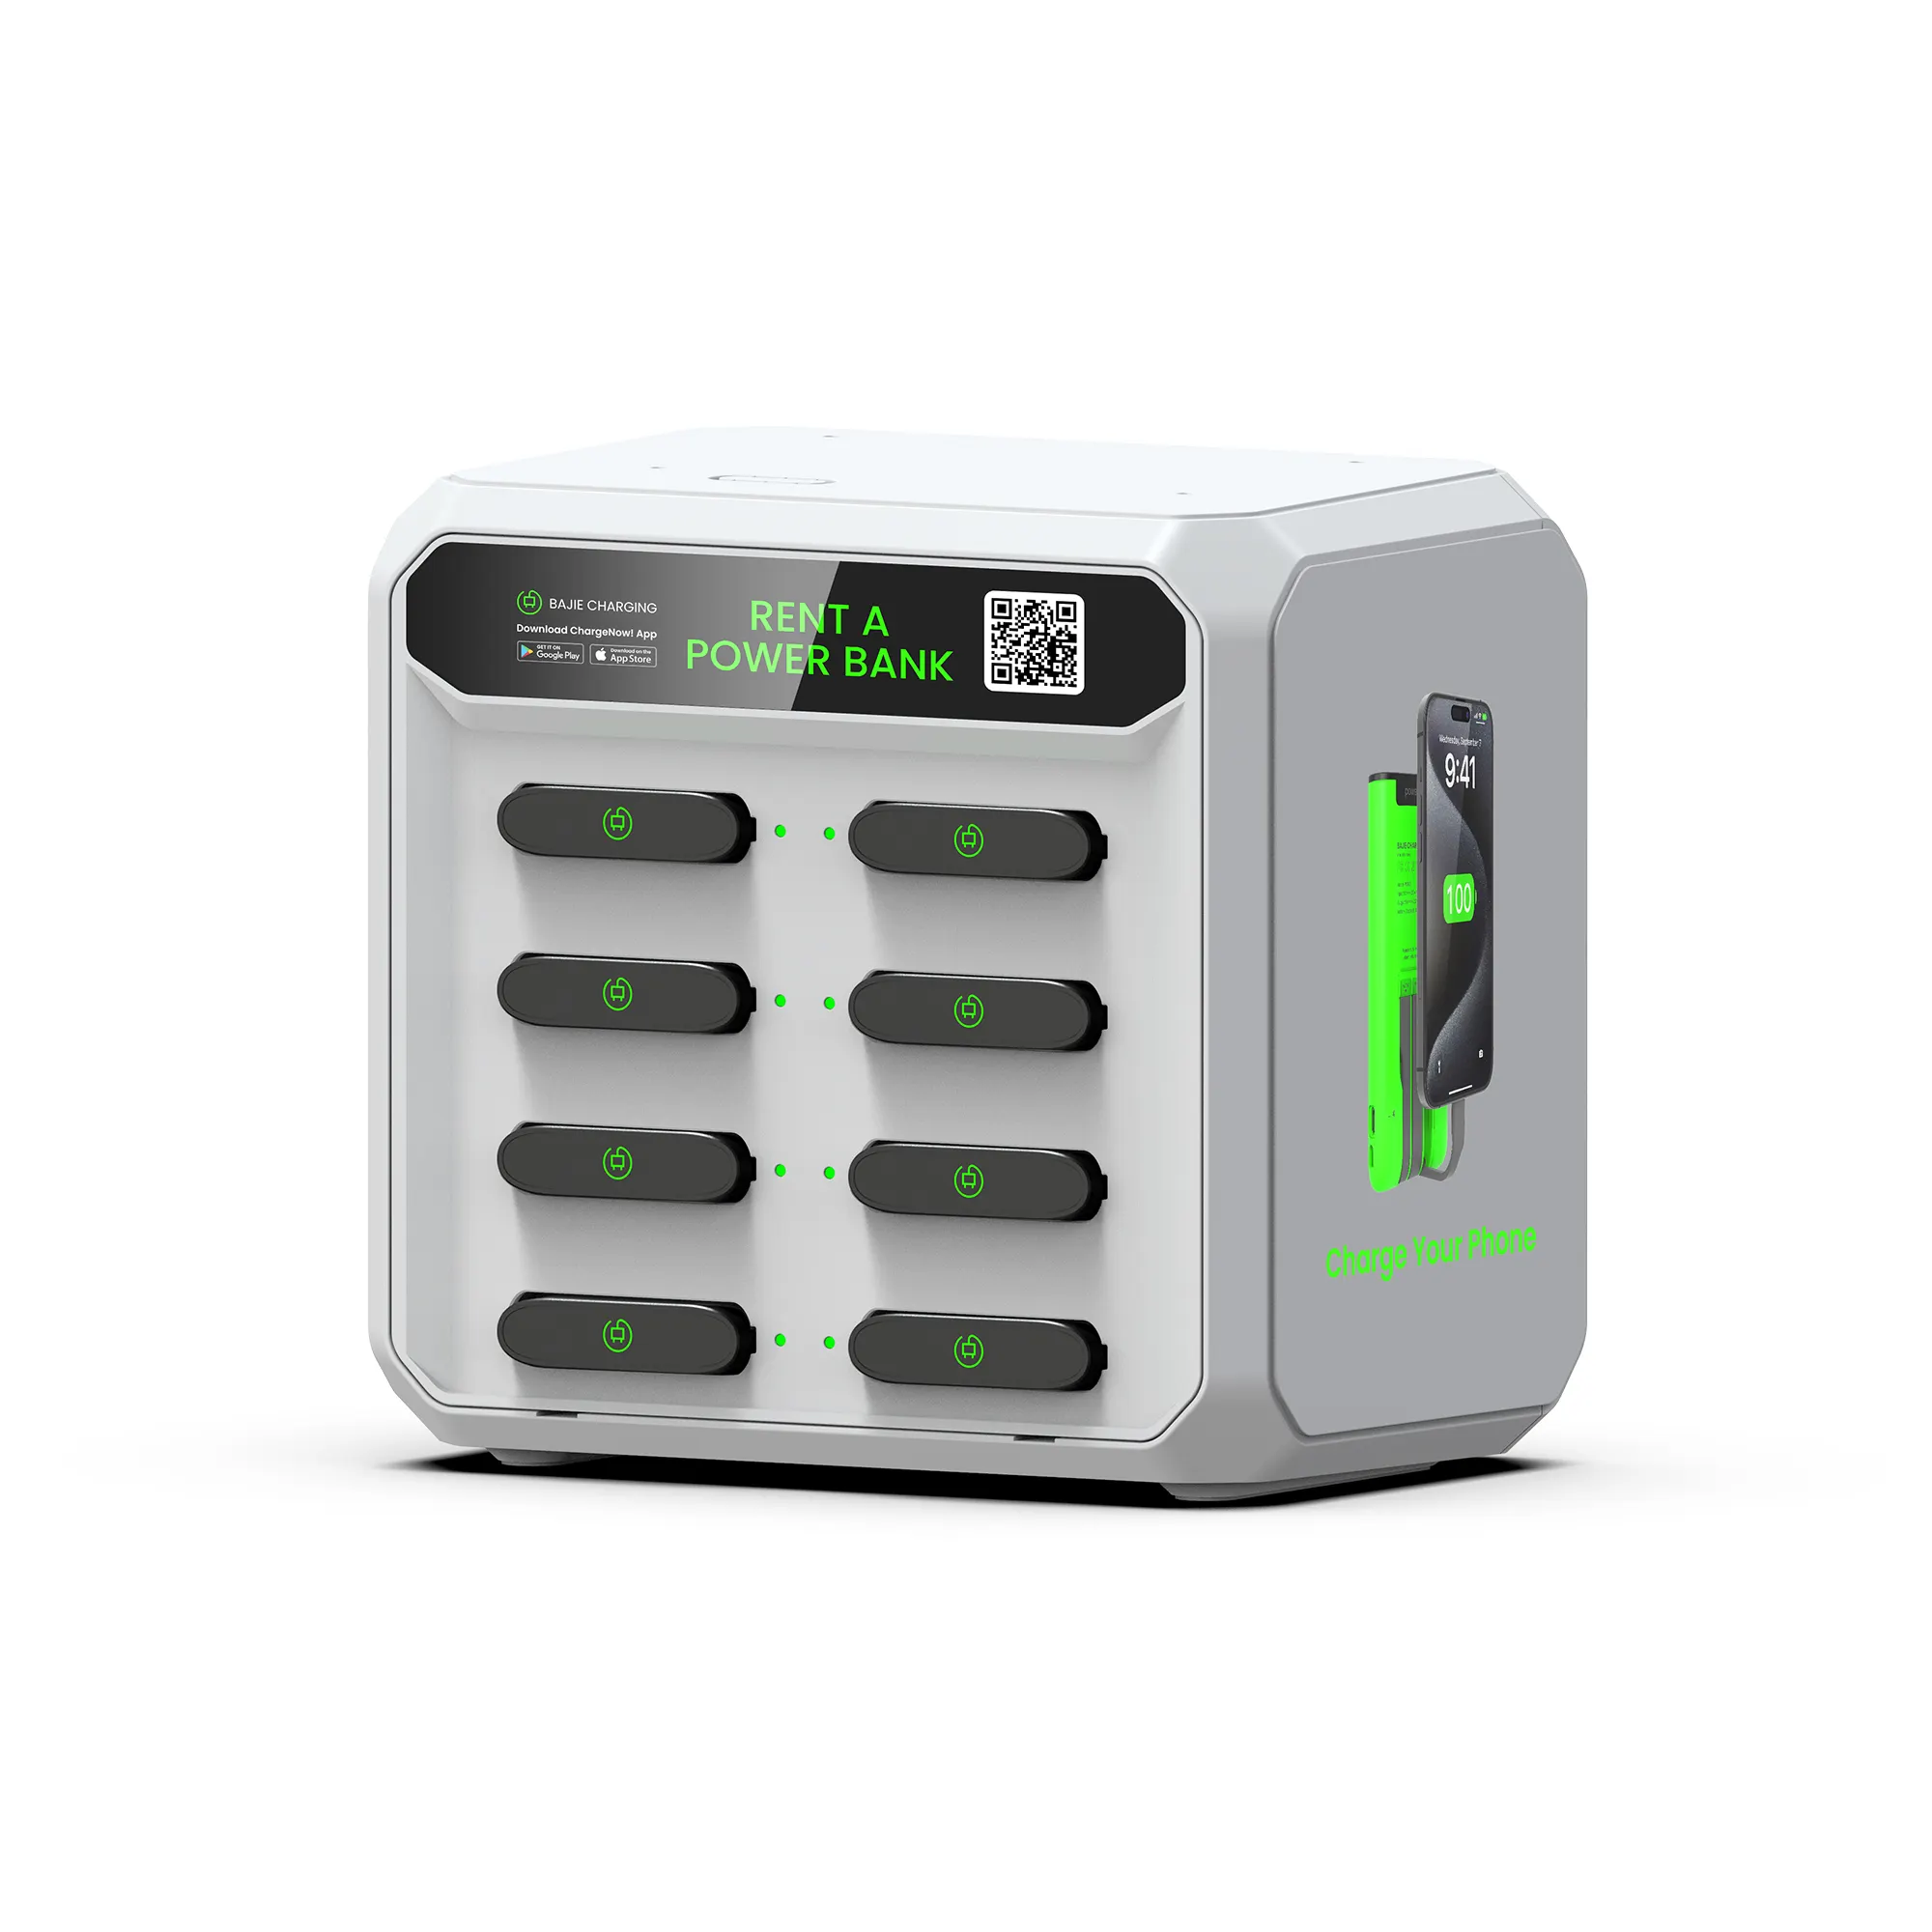 6000mah new trending products innovation sharing 8 slots sharing powerbank station charging vending machine commercial outdoor